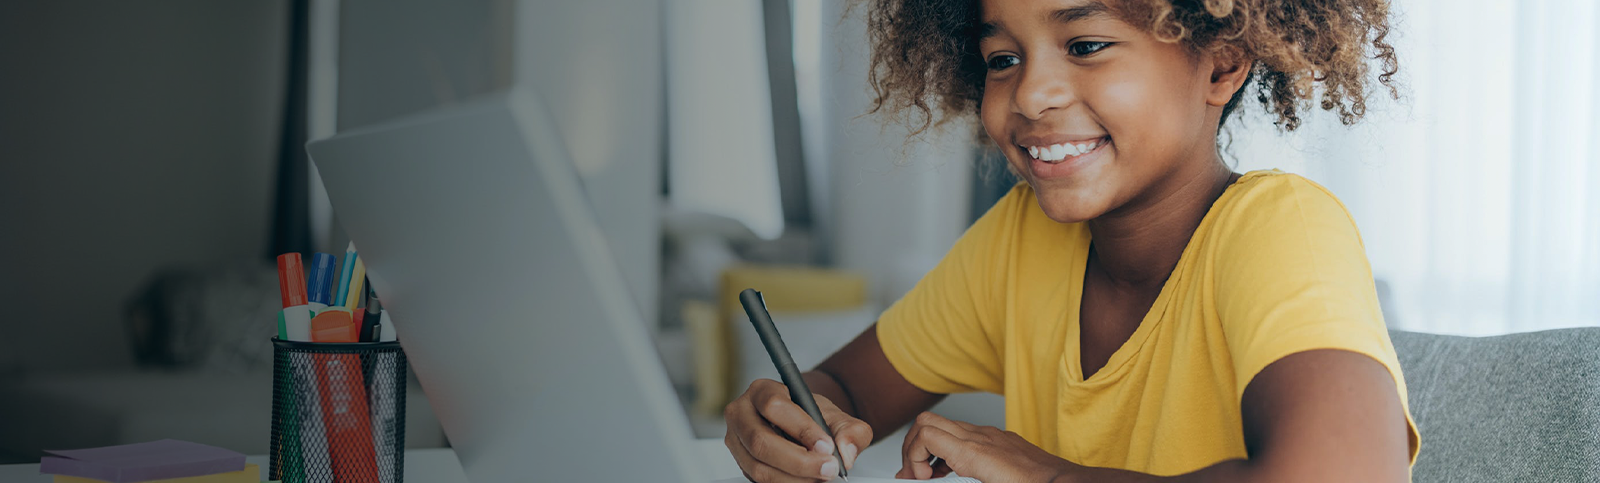 Elementary-aged child smiling while holding a pen doing school work while sitting in front of a computer.